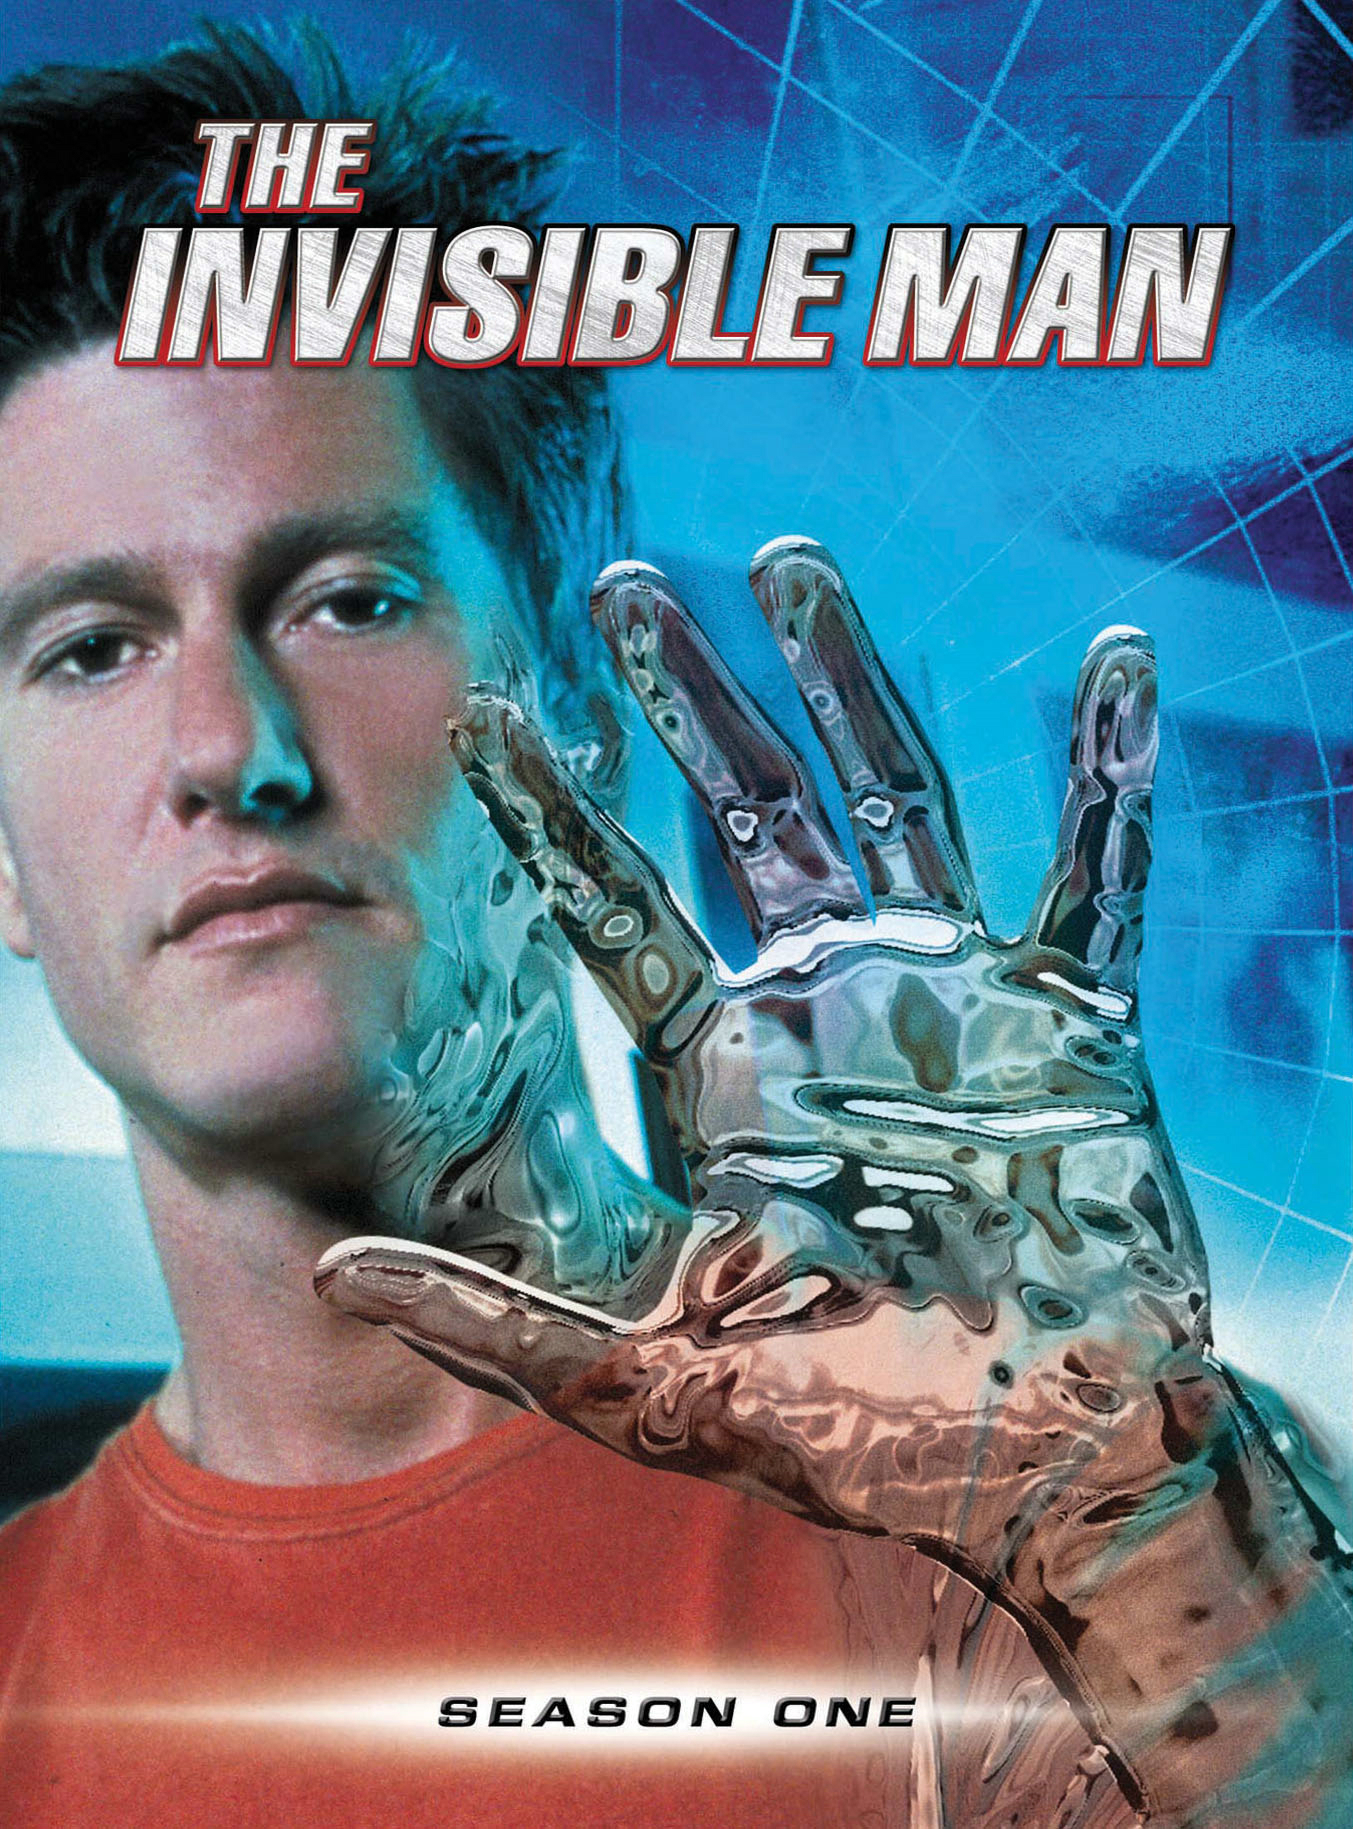 The Invisible Man: Season One - DVD [ 2005 ]  - Sci Fi Movies On DVD - Movies On GRUV